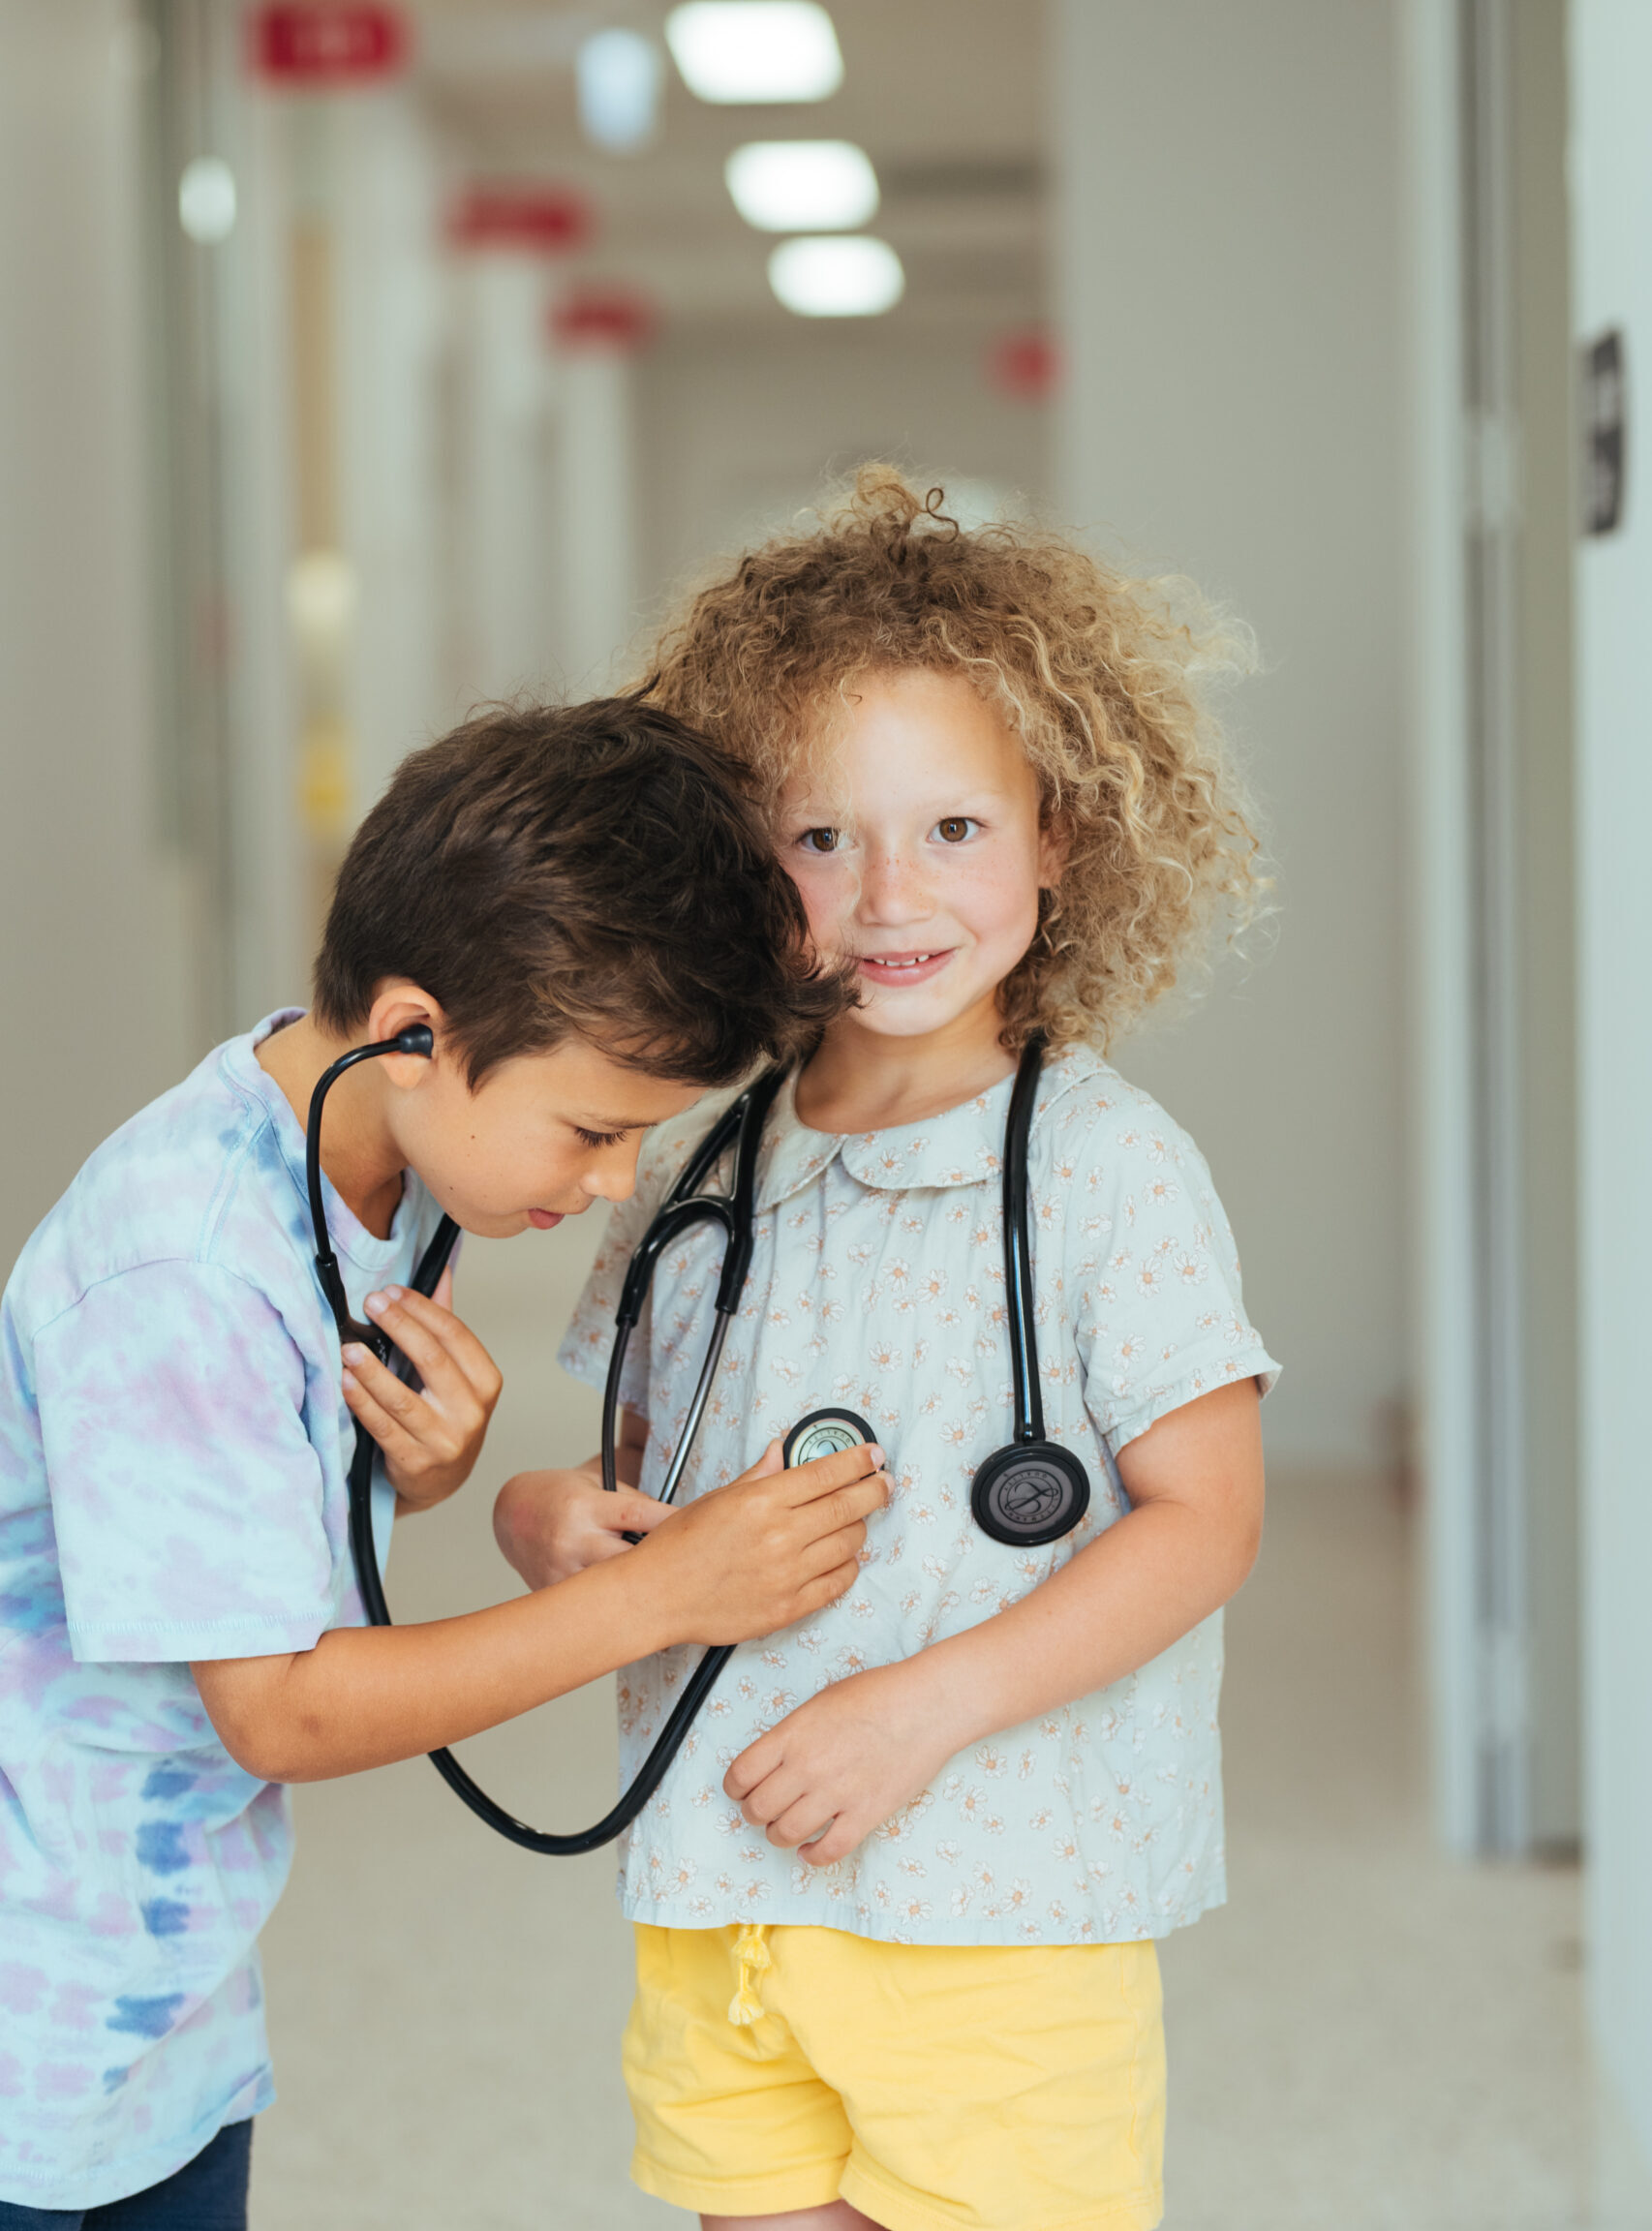 One kid using a stethoscope to listen to another kid's heart